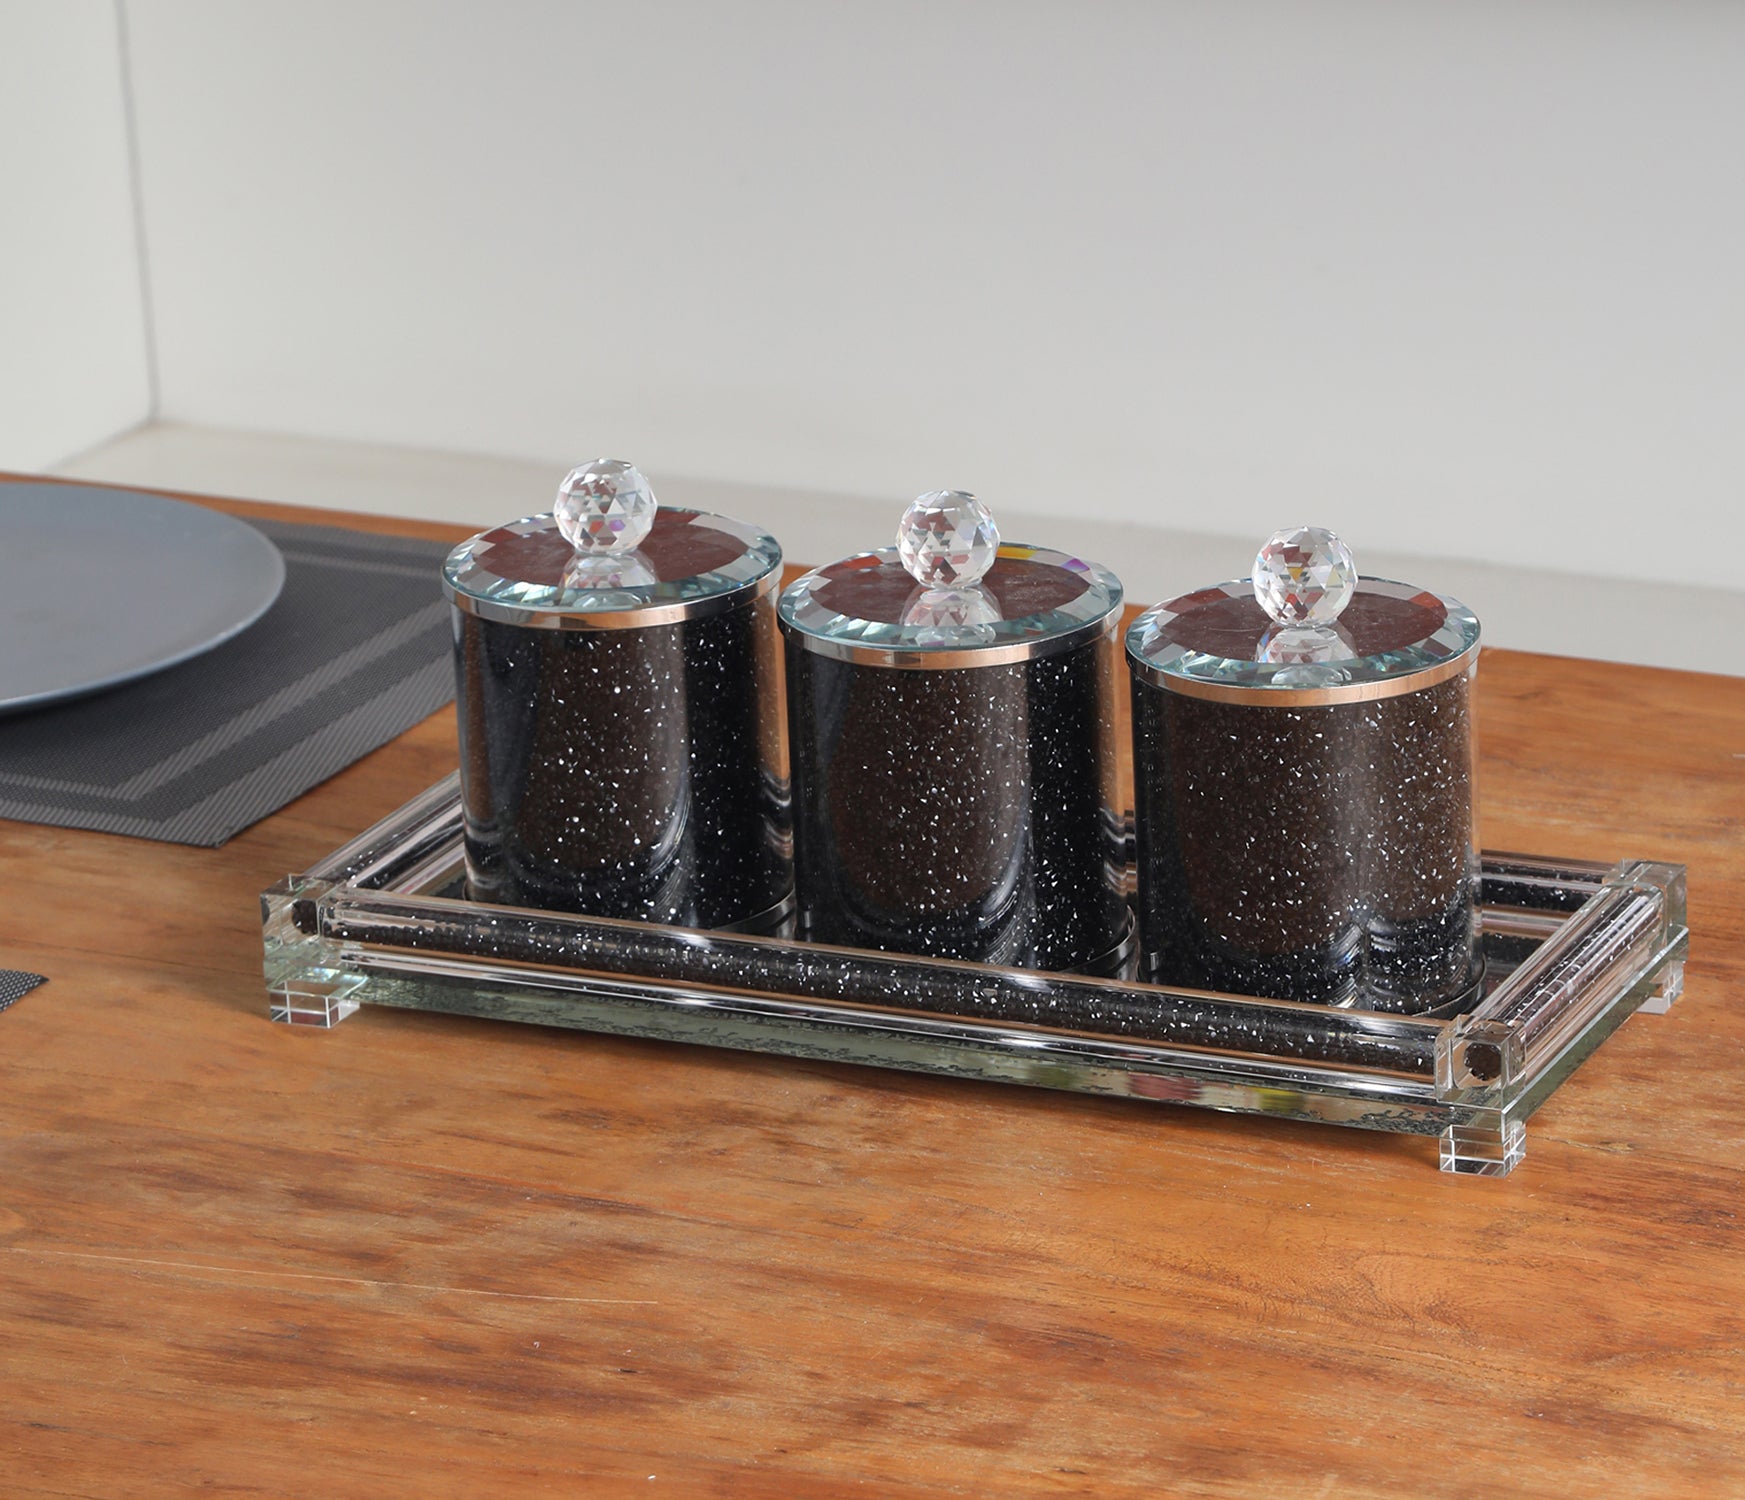 Ambrose Exquisite Tea, Sugar, Coffee Canisters with black-glass